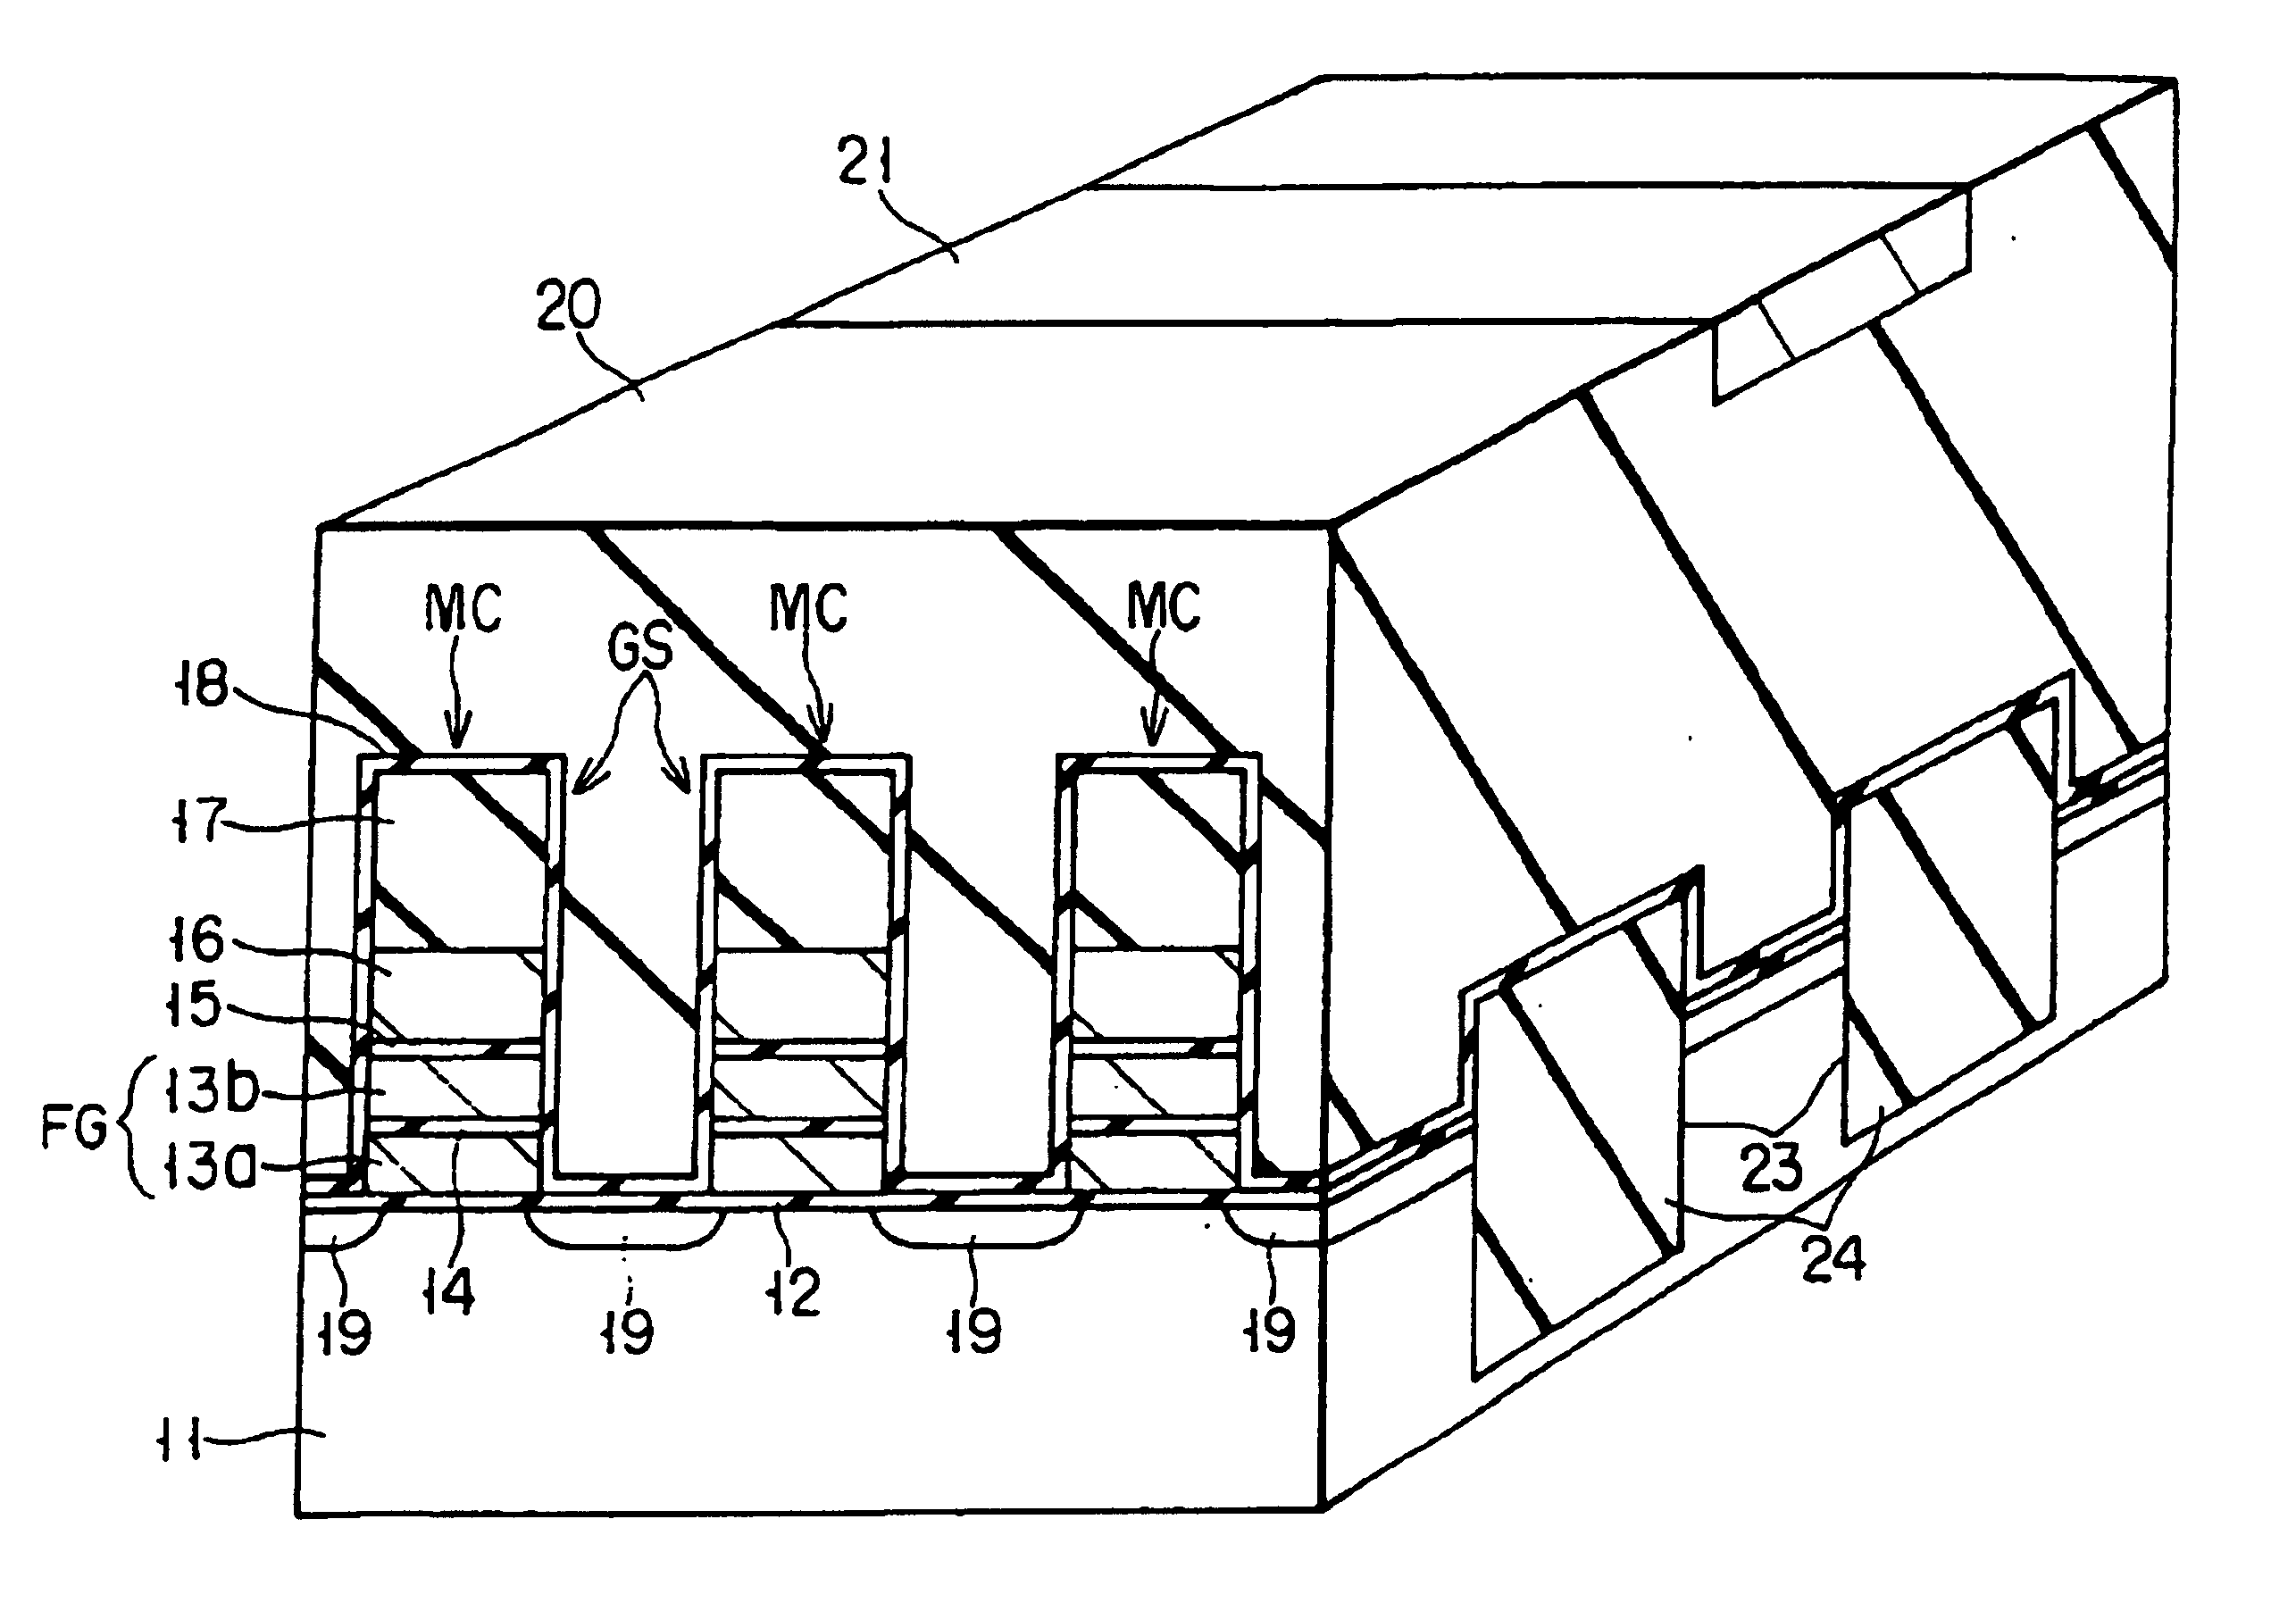 Nonvolatile semiconductor memory device having a two-layer gate structure and method for manufacturing the same